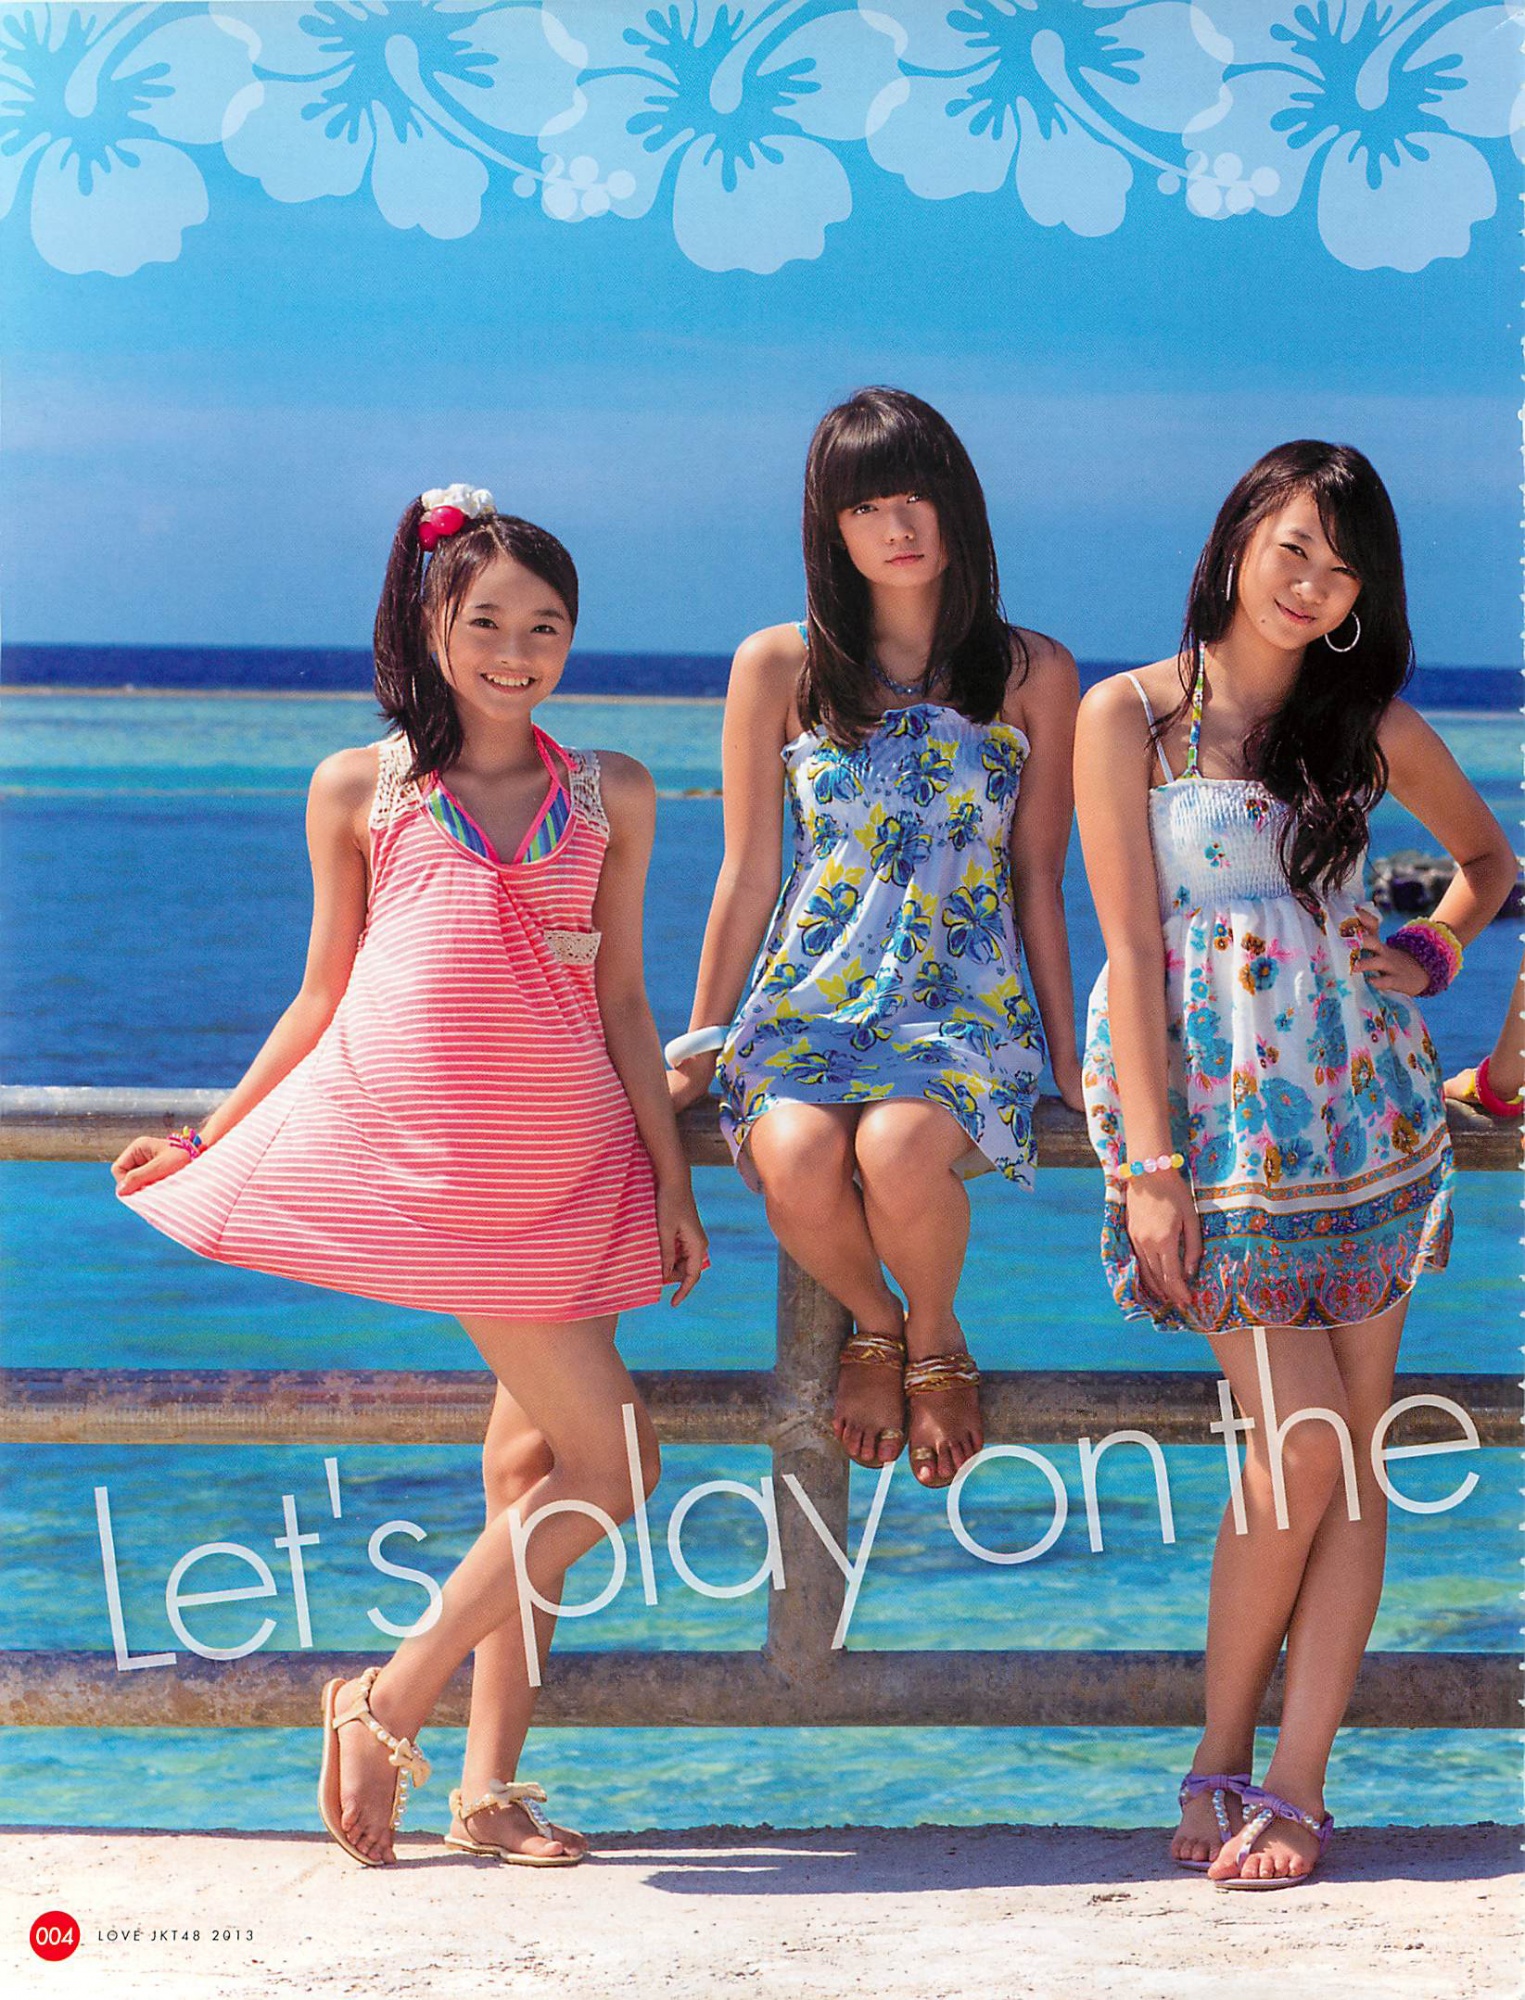 Jkt48 Android iPhone Wallpaper Asiachan Kpop Image Board